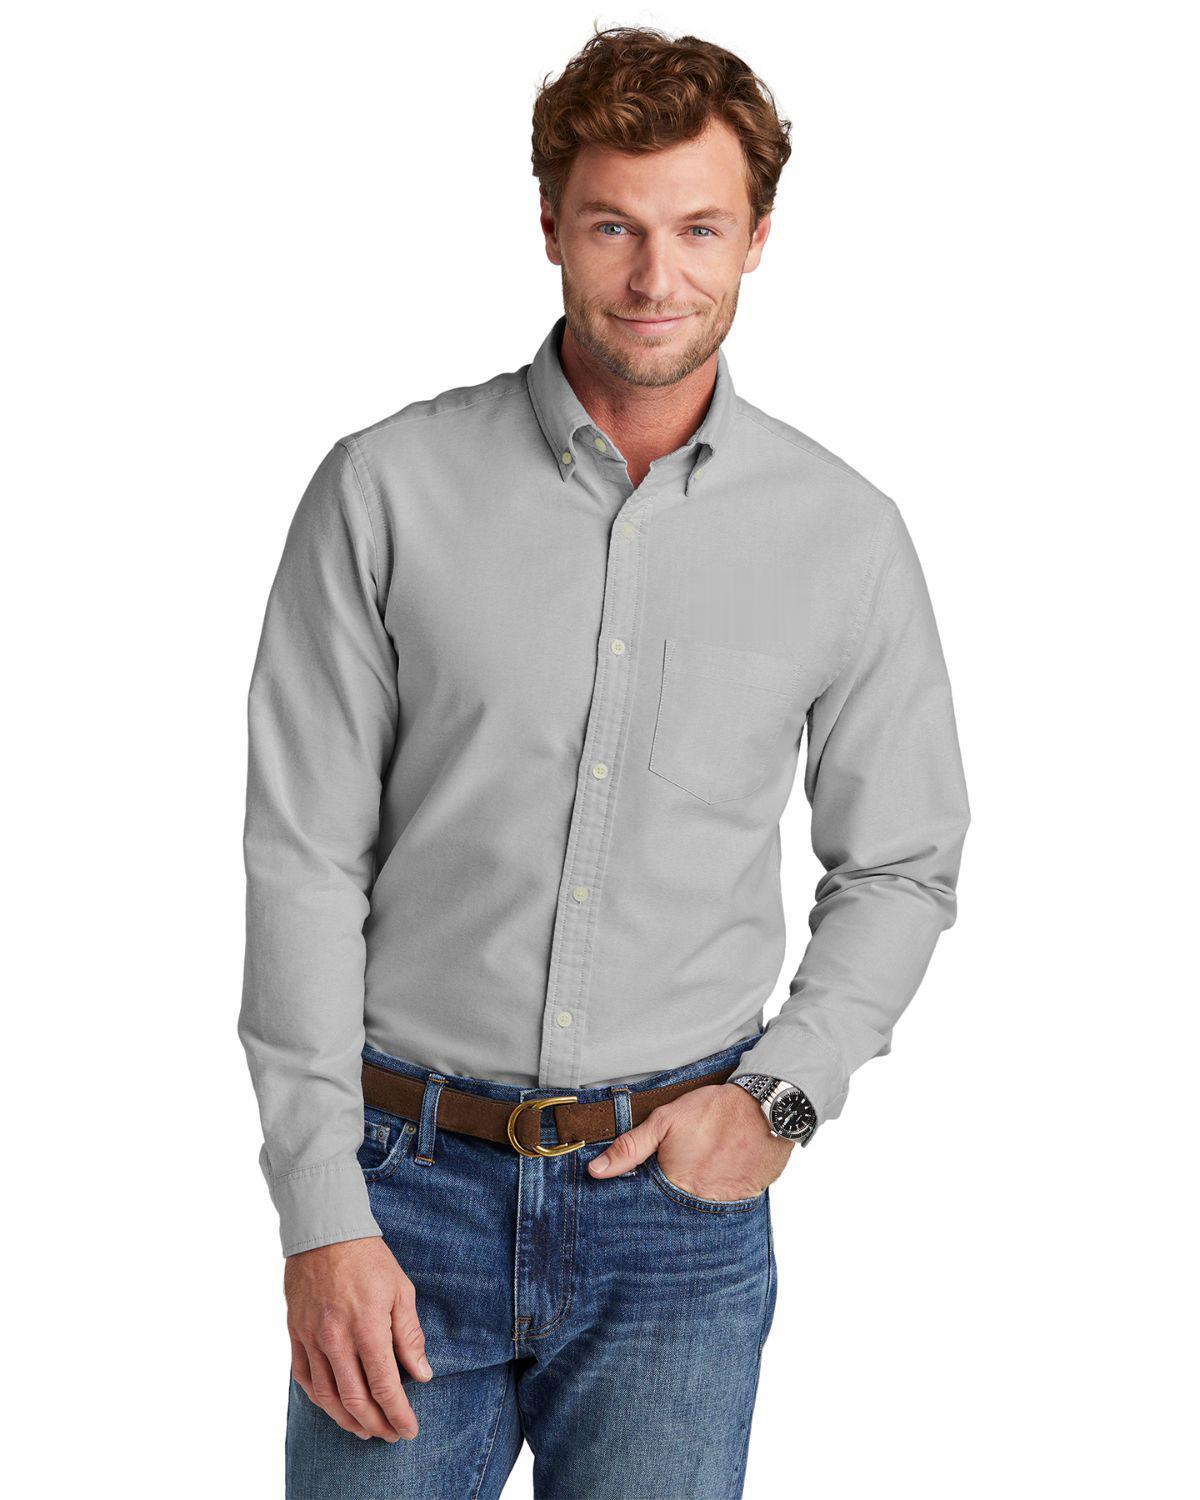 Brooks Brothers BB18004 Casual Oxford Cloth Shirt